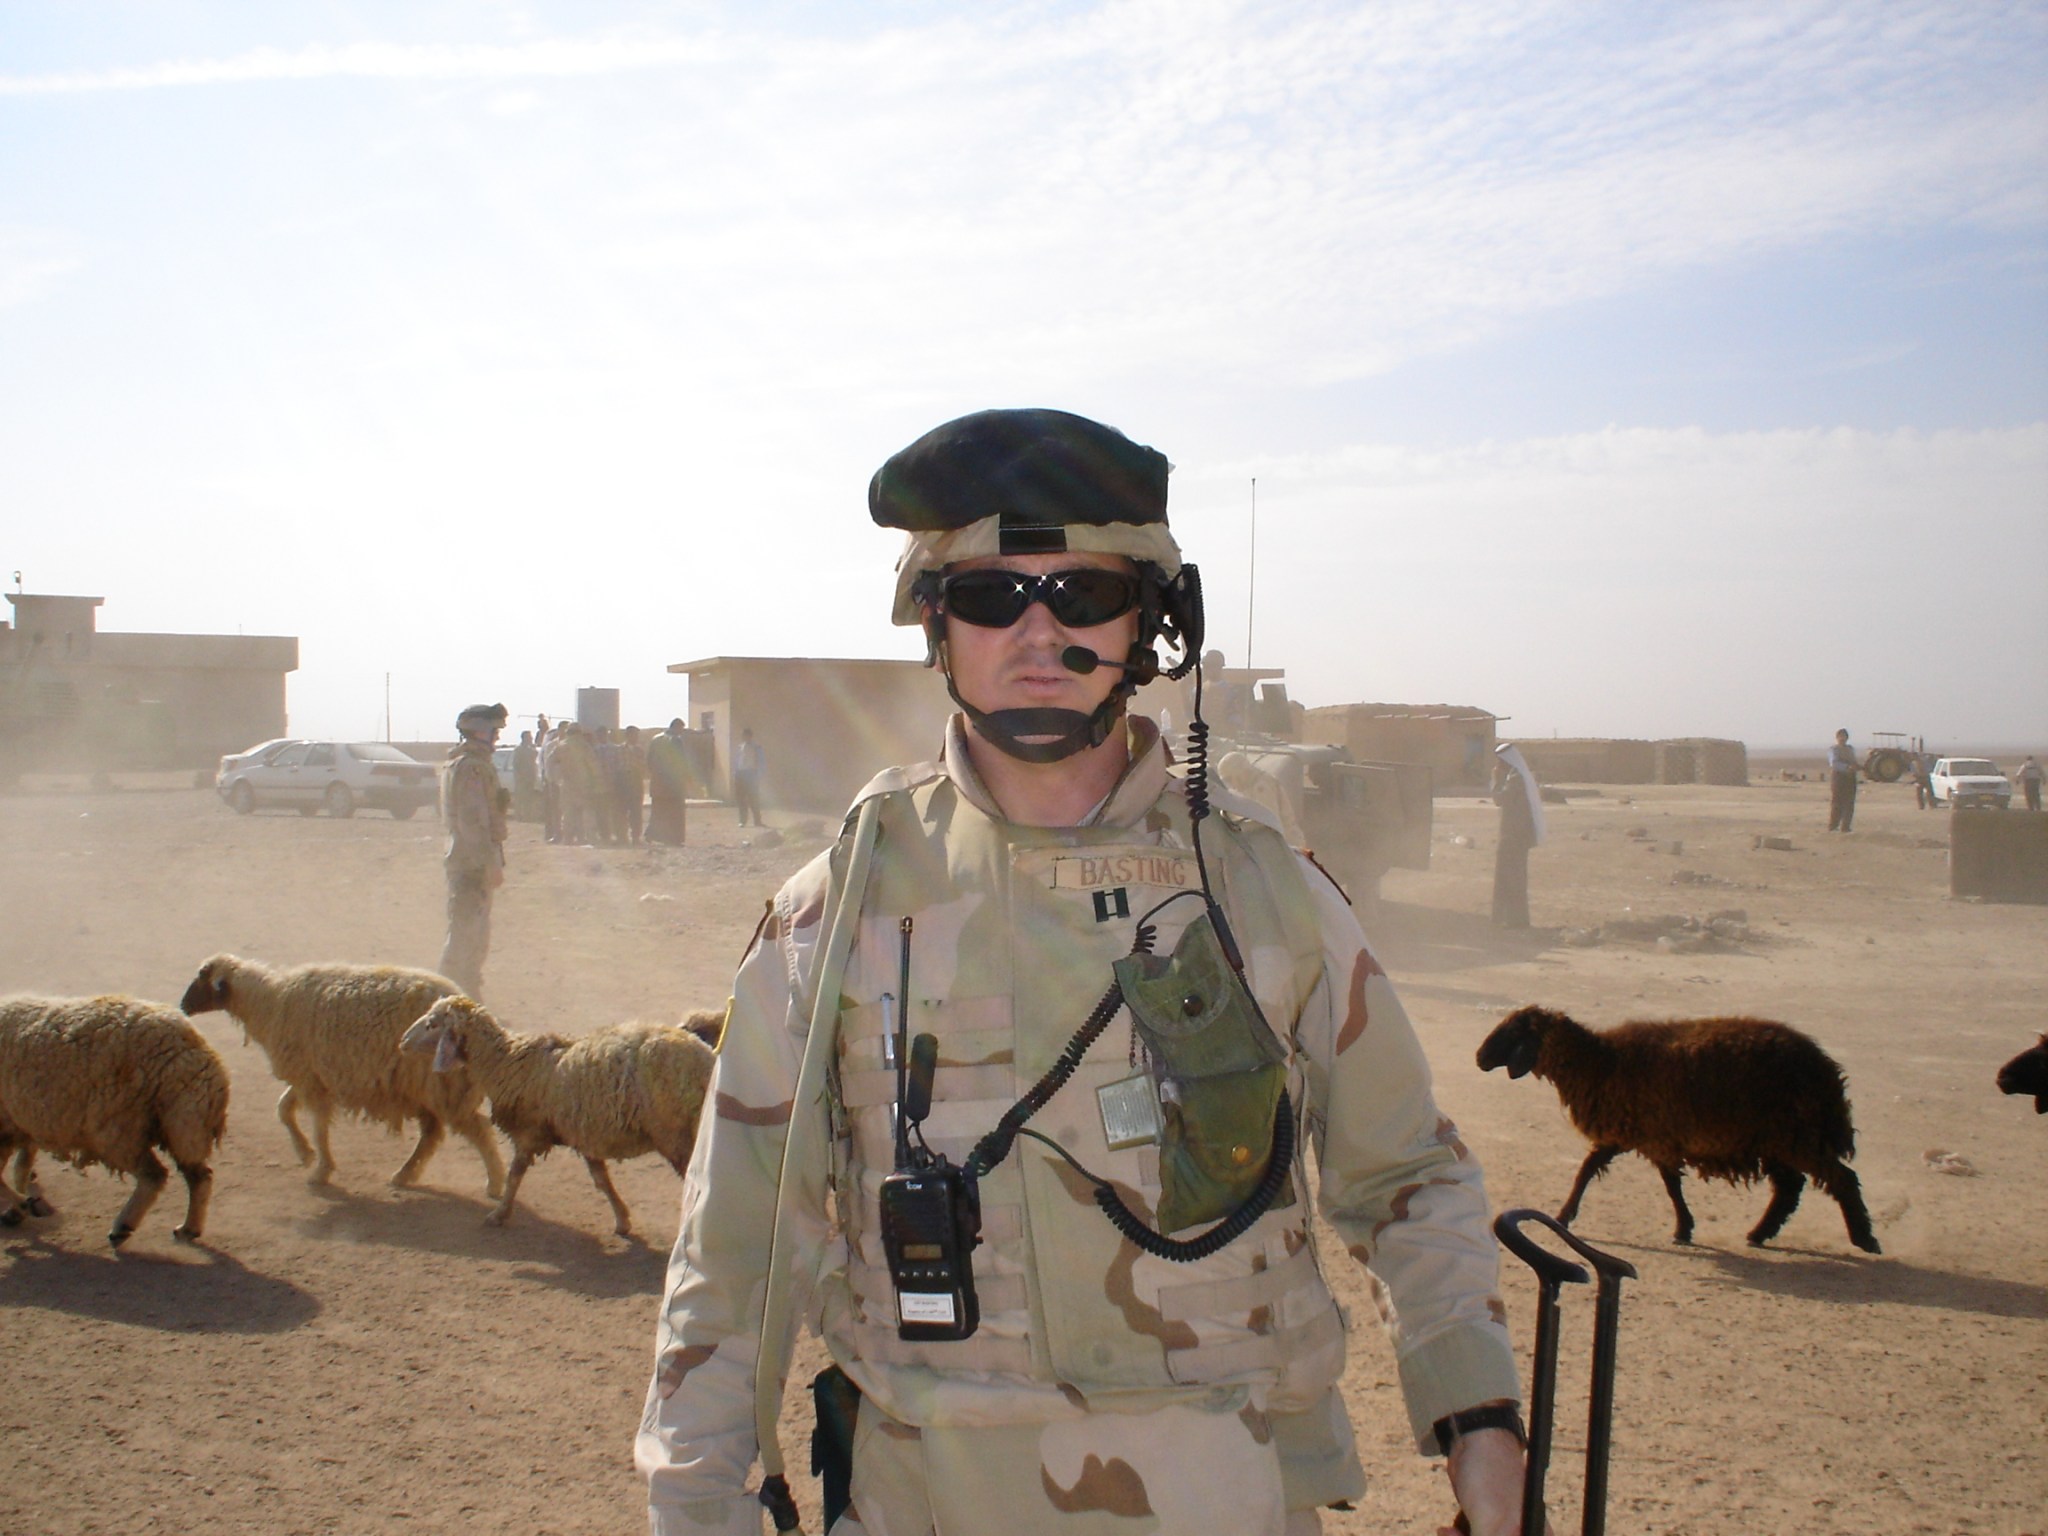 A man in a soldier uniform stands in the desert with sheep behind him.